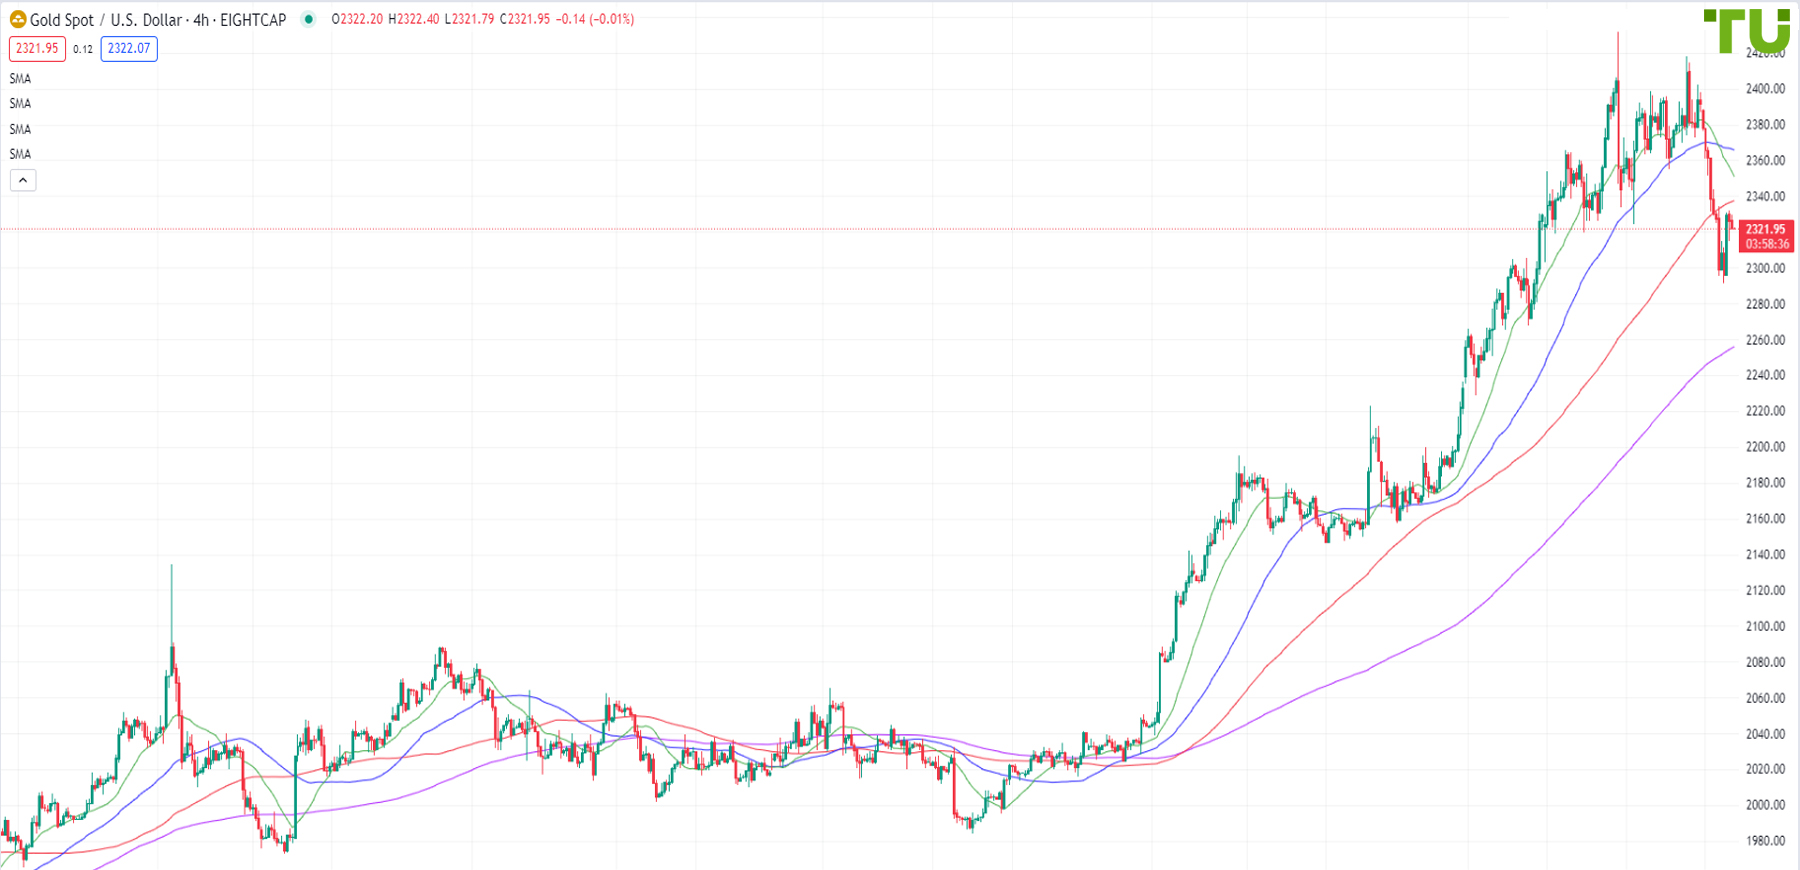 XAU/USD is recovering after decline